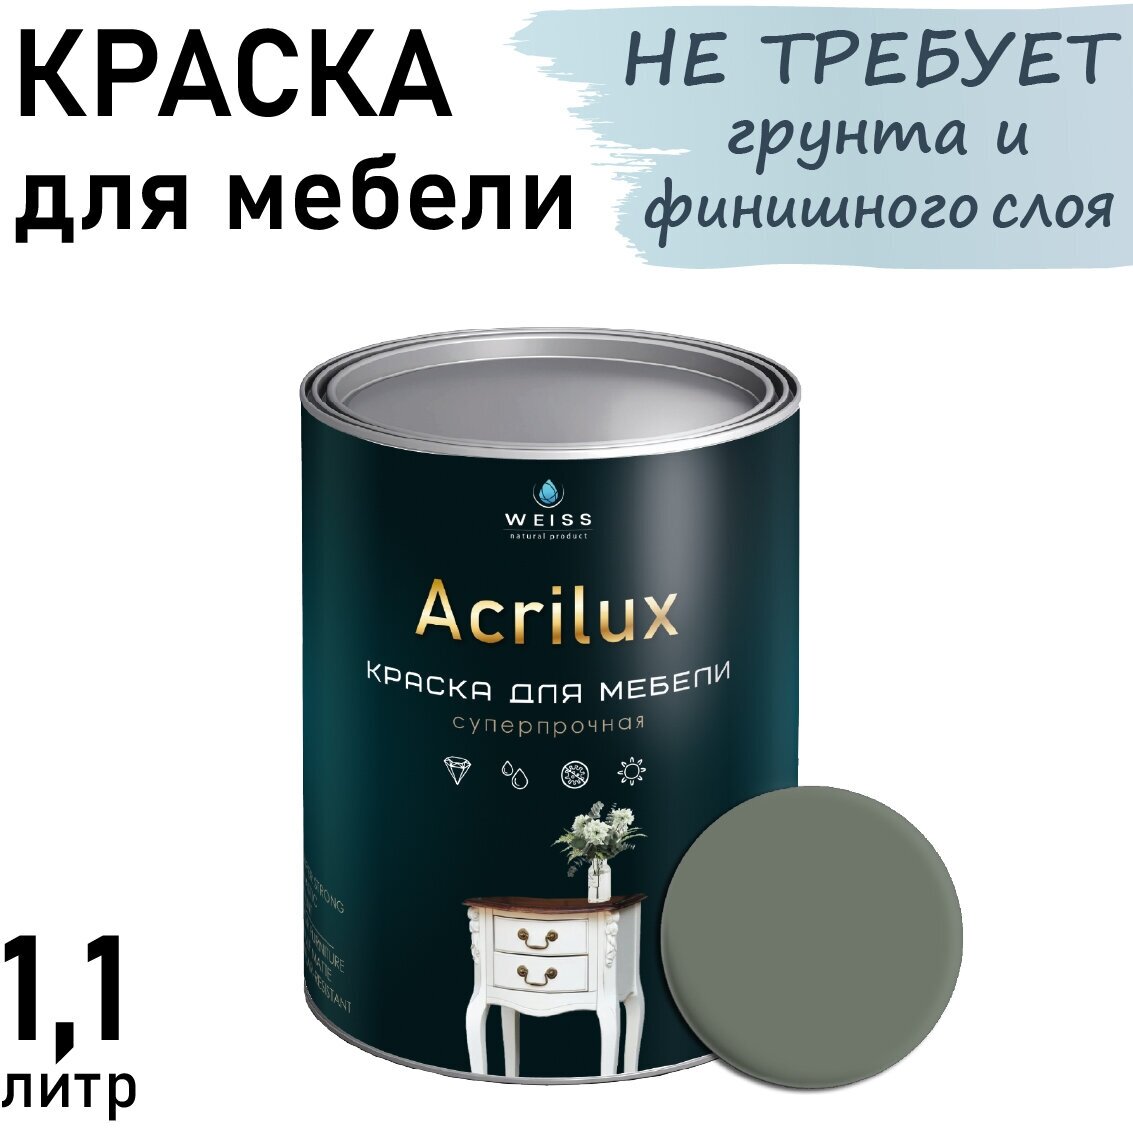  Acrilux   1.1 RAL 7033,   ,  ,  , .  